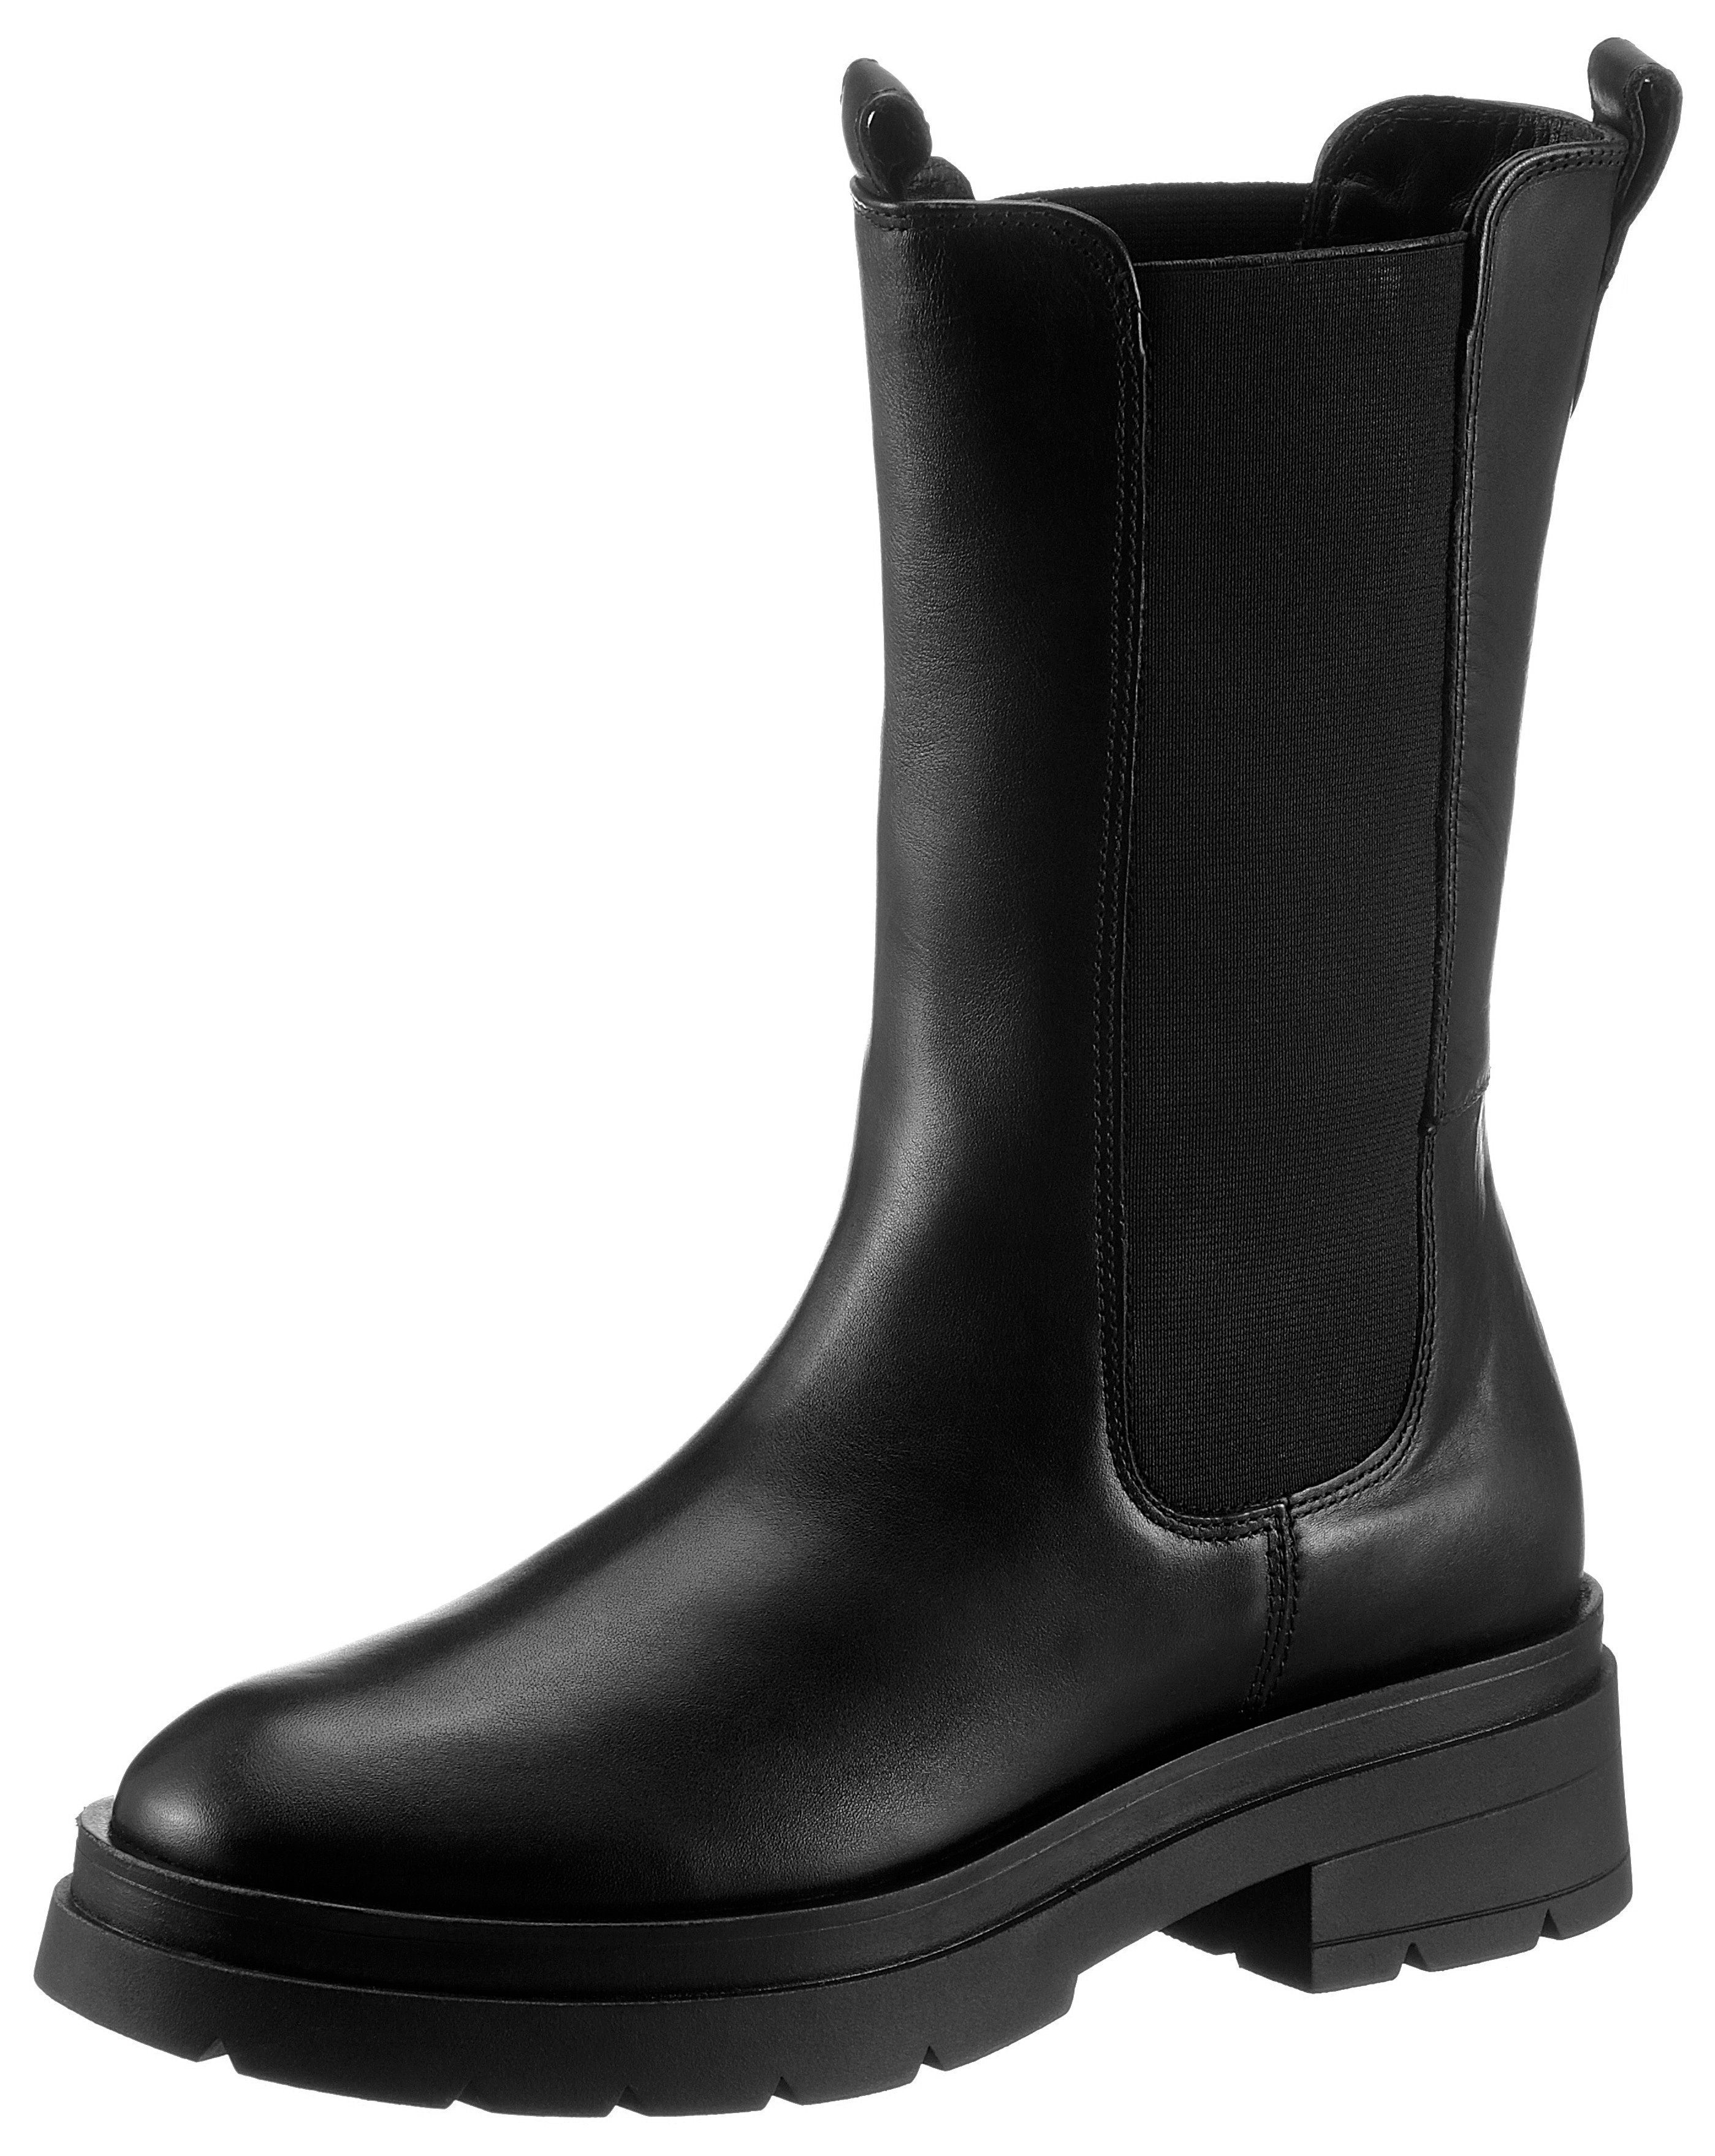 Marc O'Polo »Filippa 7a Chelsea Boots« Chelseaboots online kaufen | OTTO